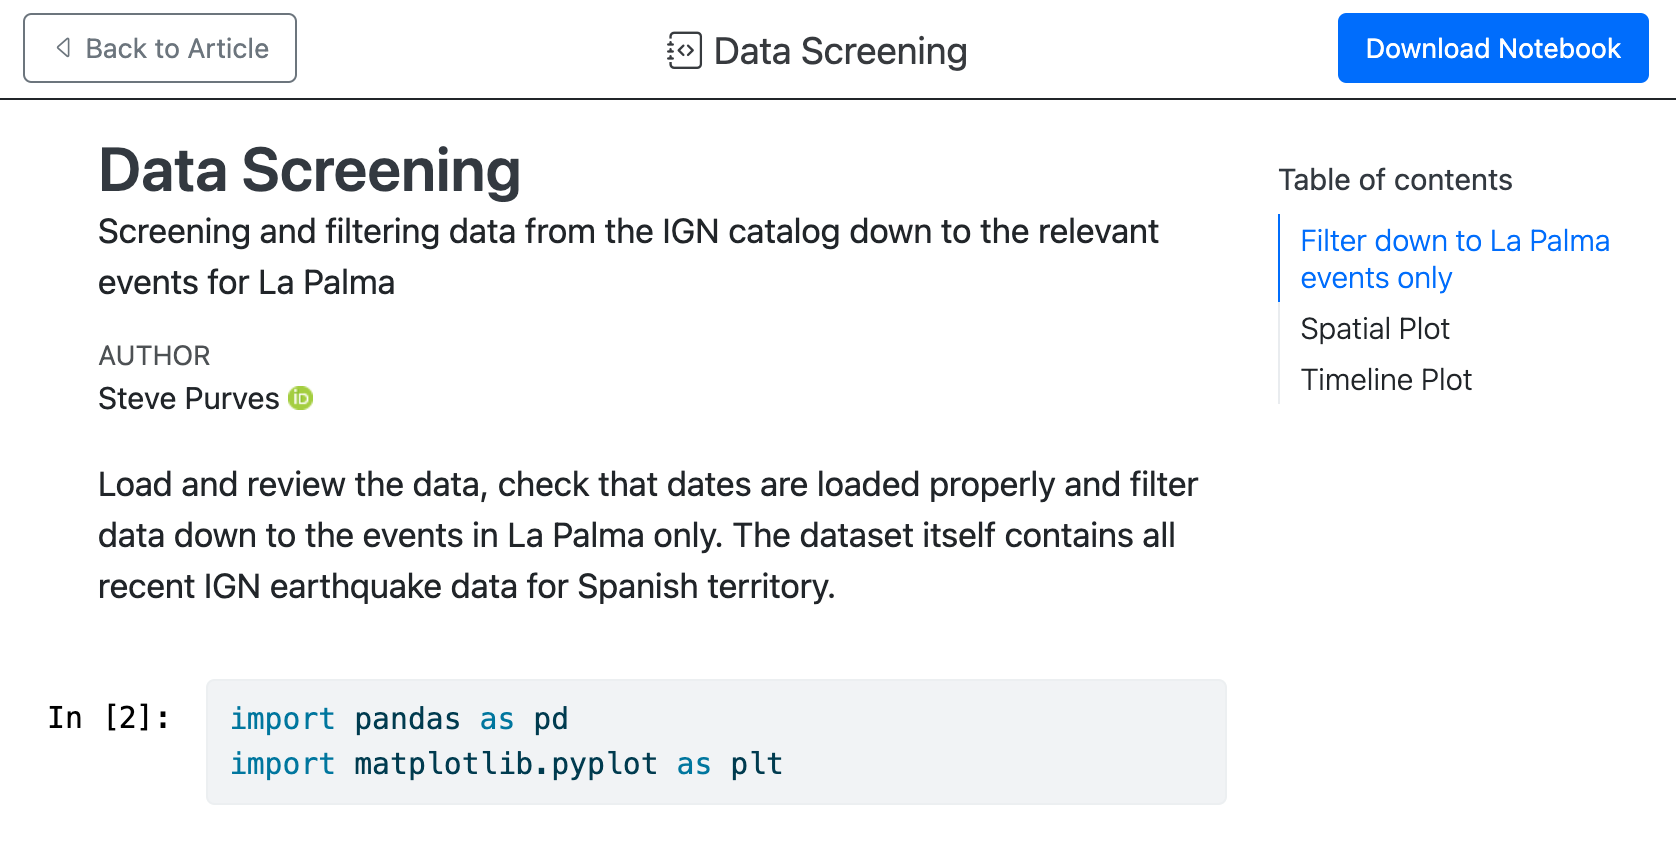 Screenshot of the notebook view of data-screening.ipynb. The top of the page has a link Back to the Article and a button to Download Notebook. The content of the page includes some text and a cell displaying code.